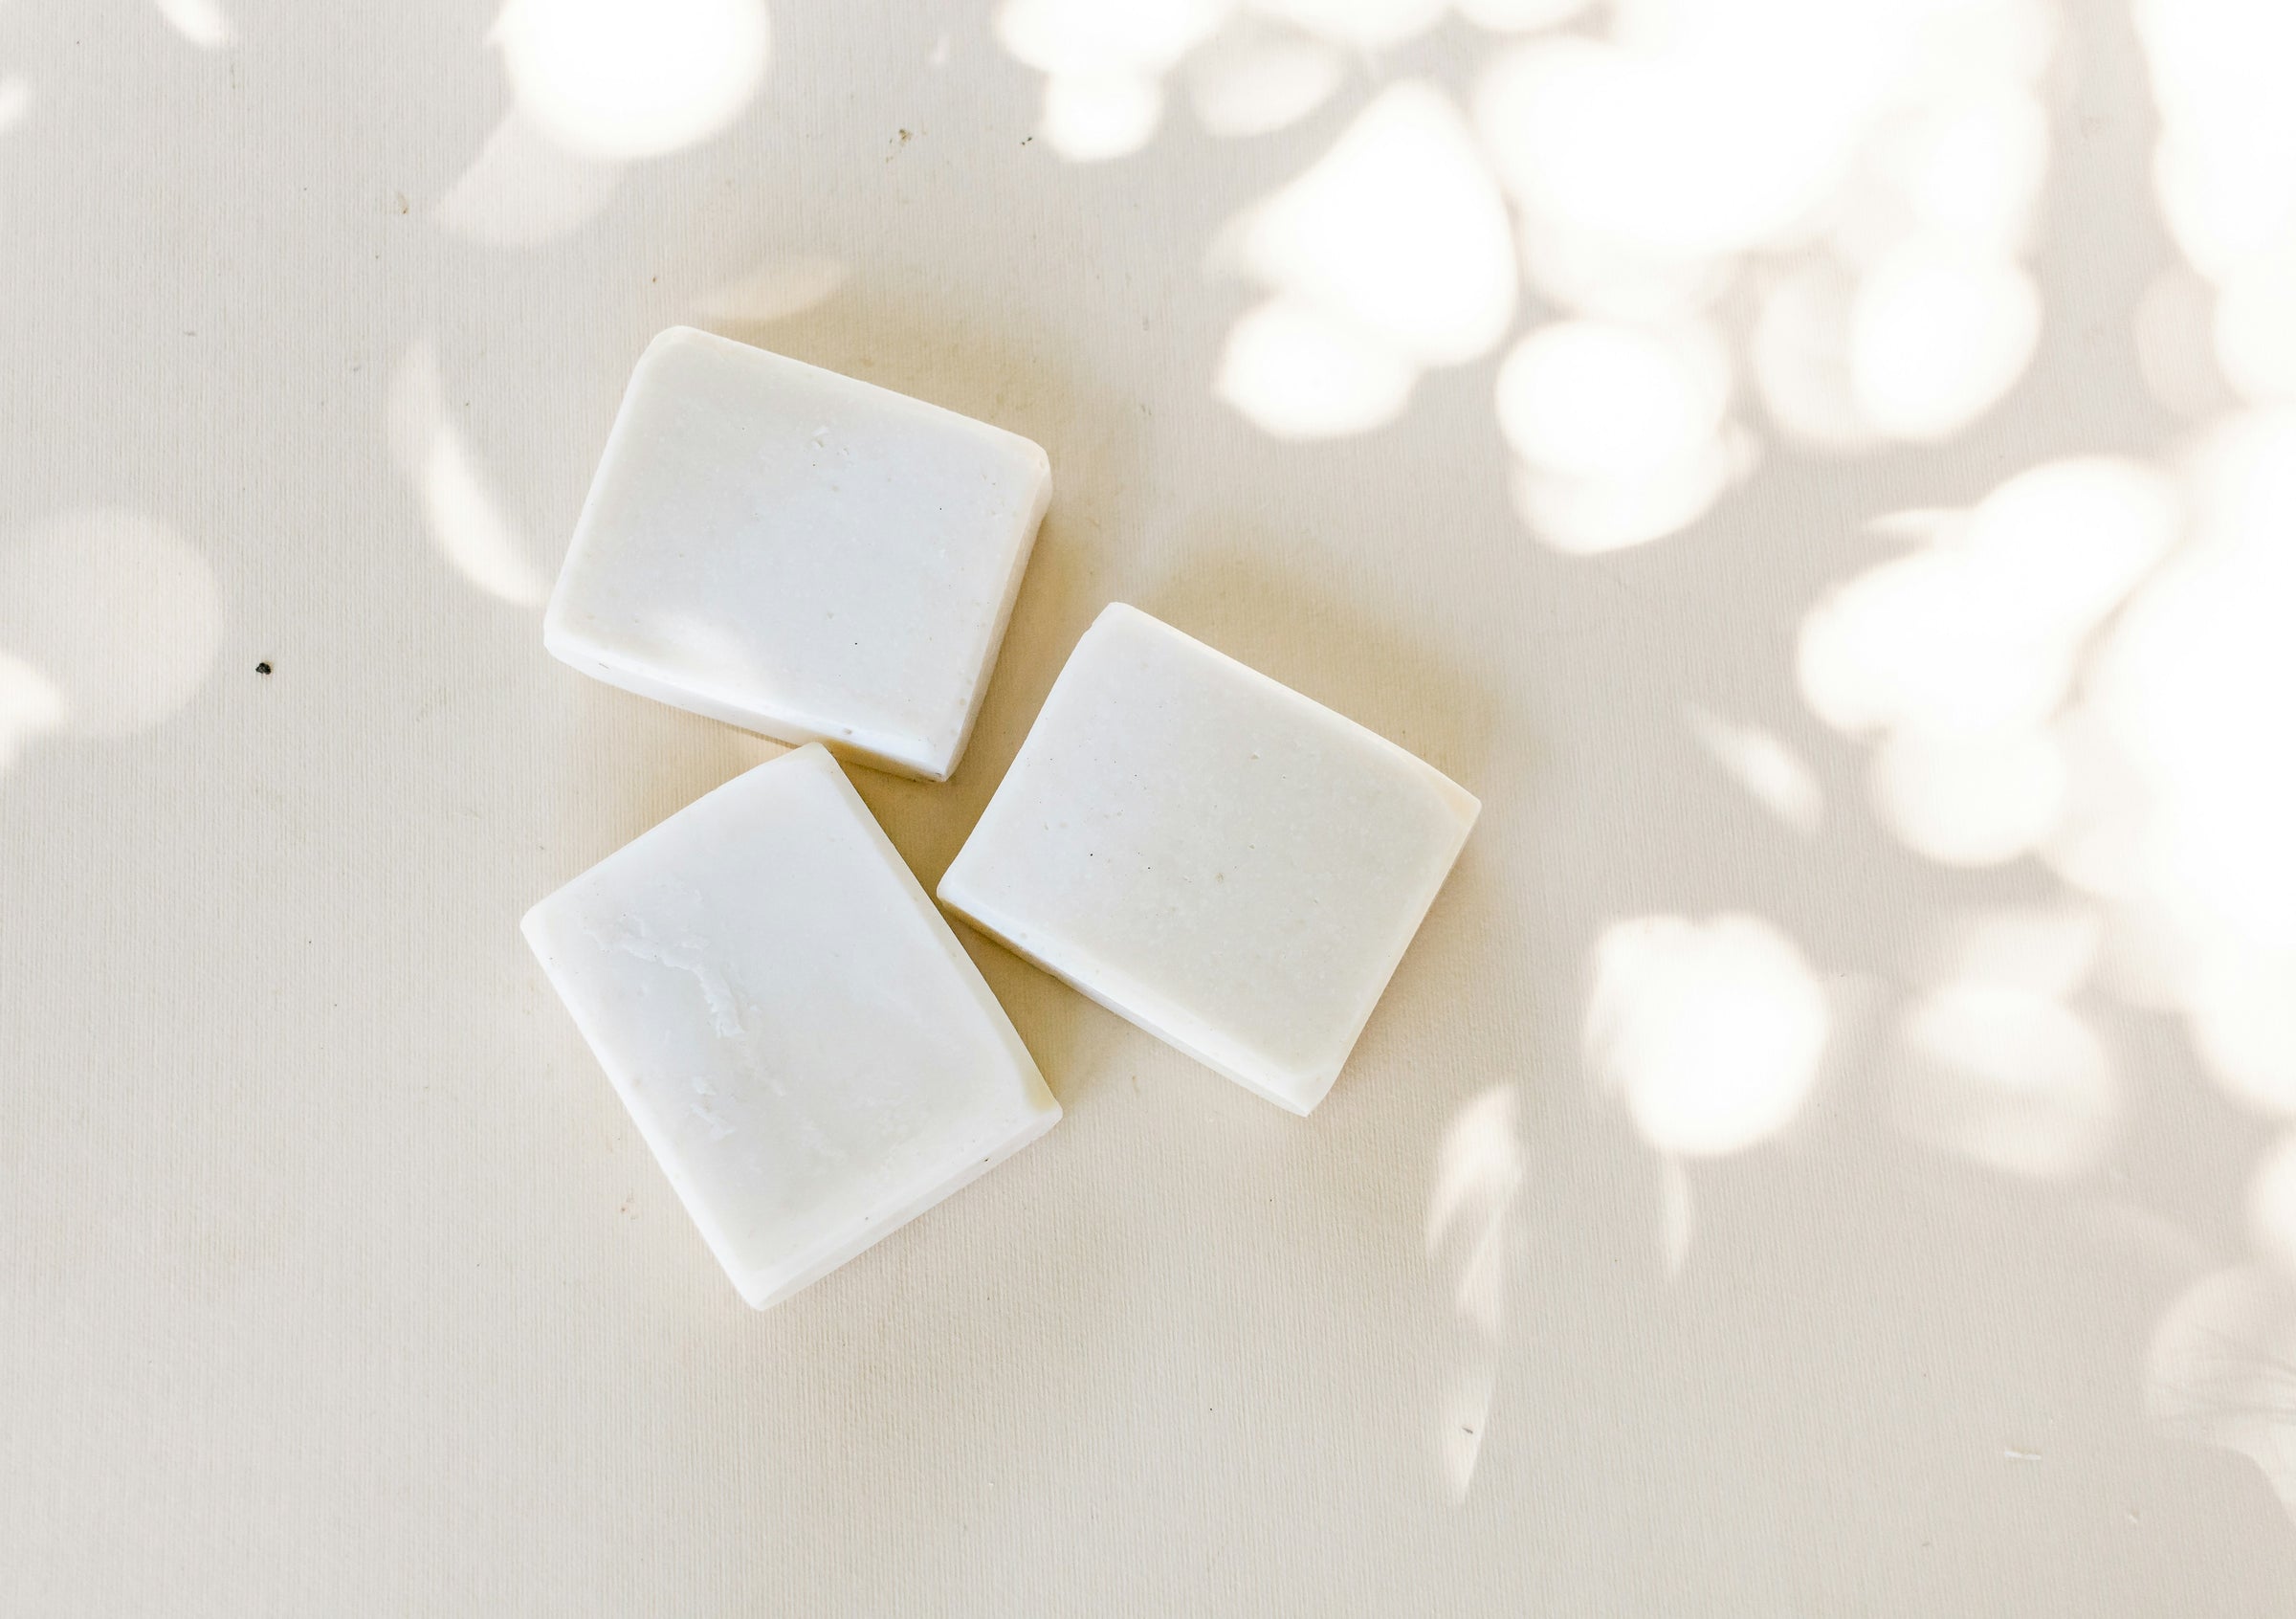 Ethical Trade Co - Soap Photo